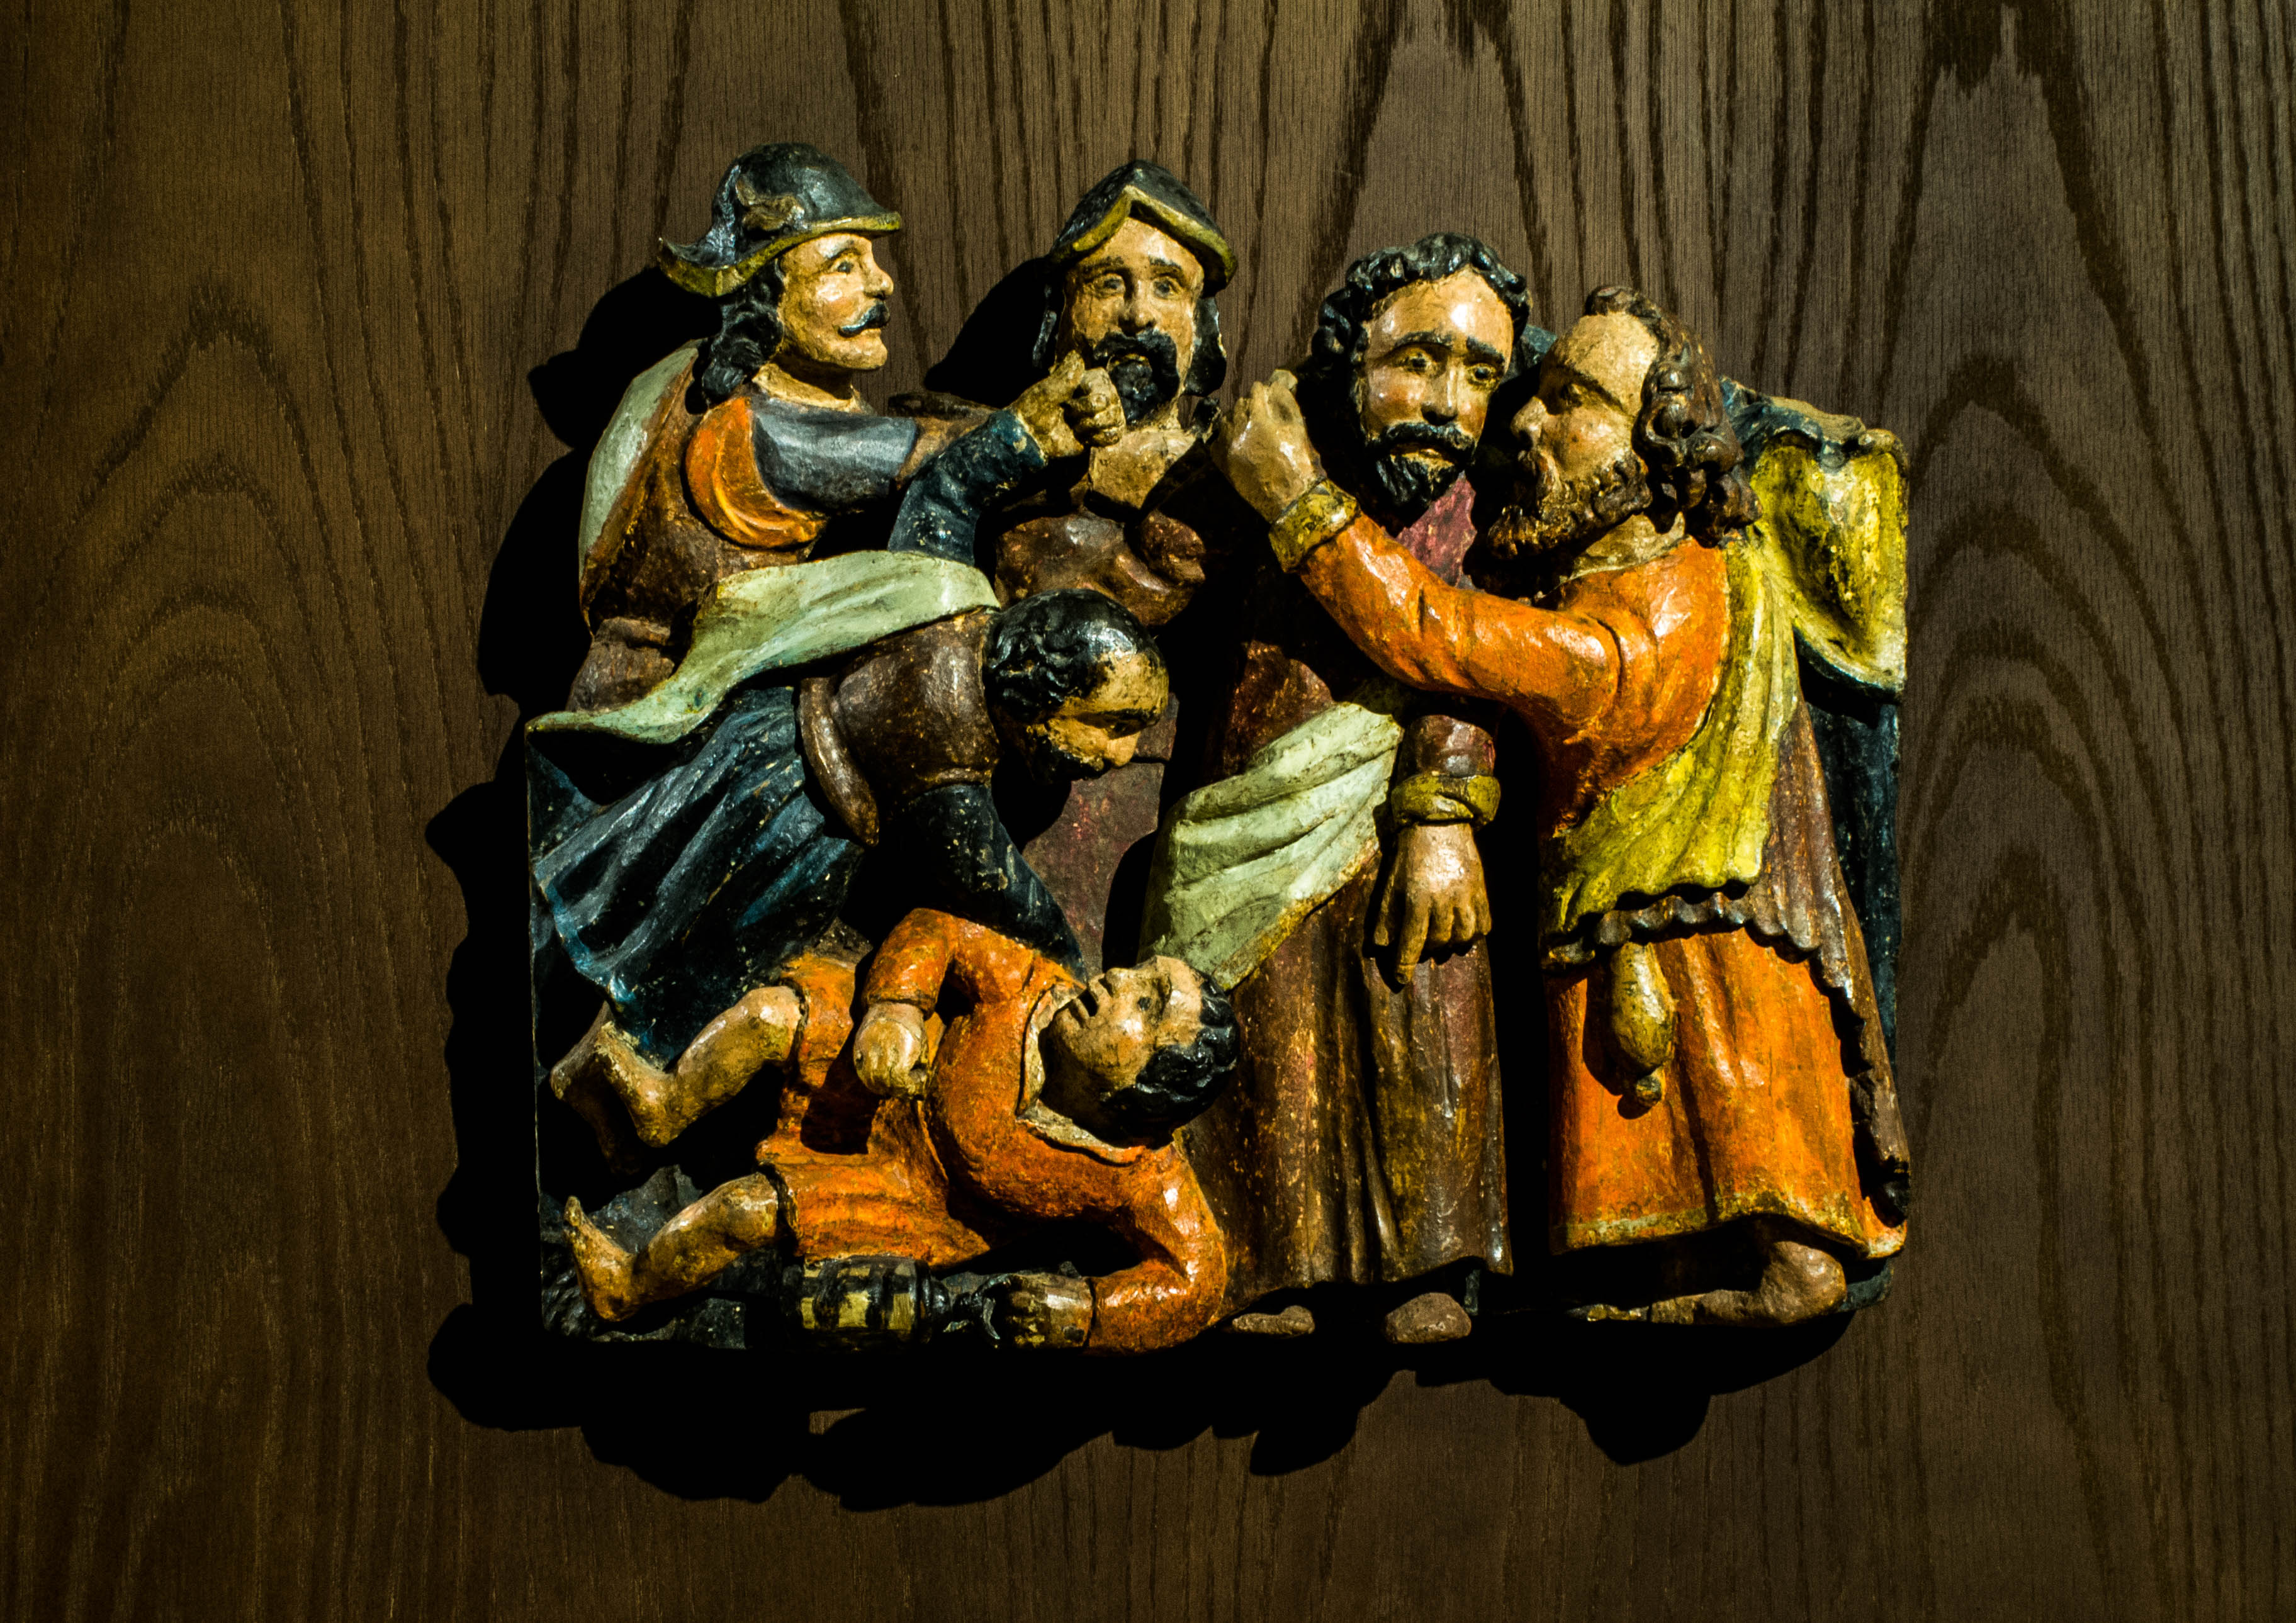 a group of men, on the right, Judas kisses Jesus in the Holy Week episodes